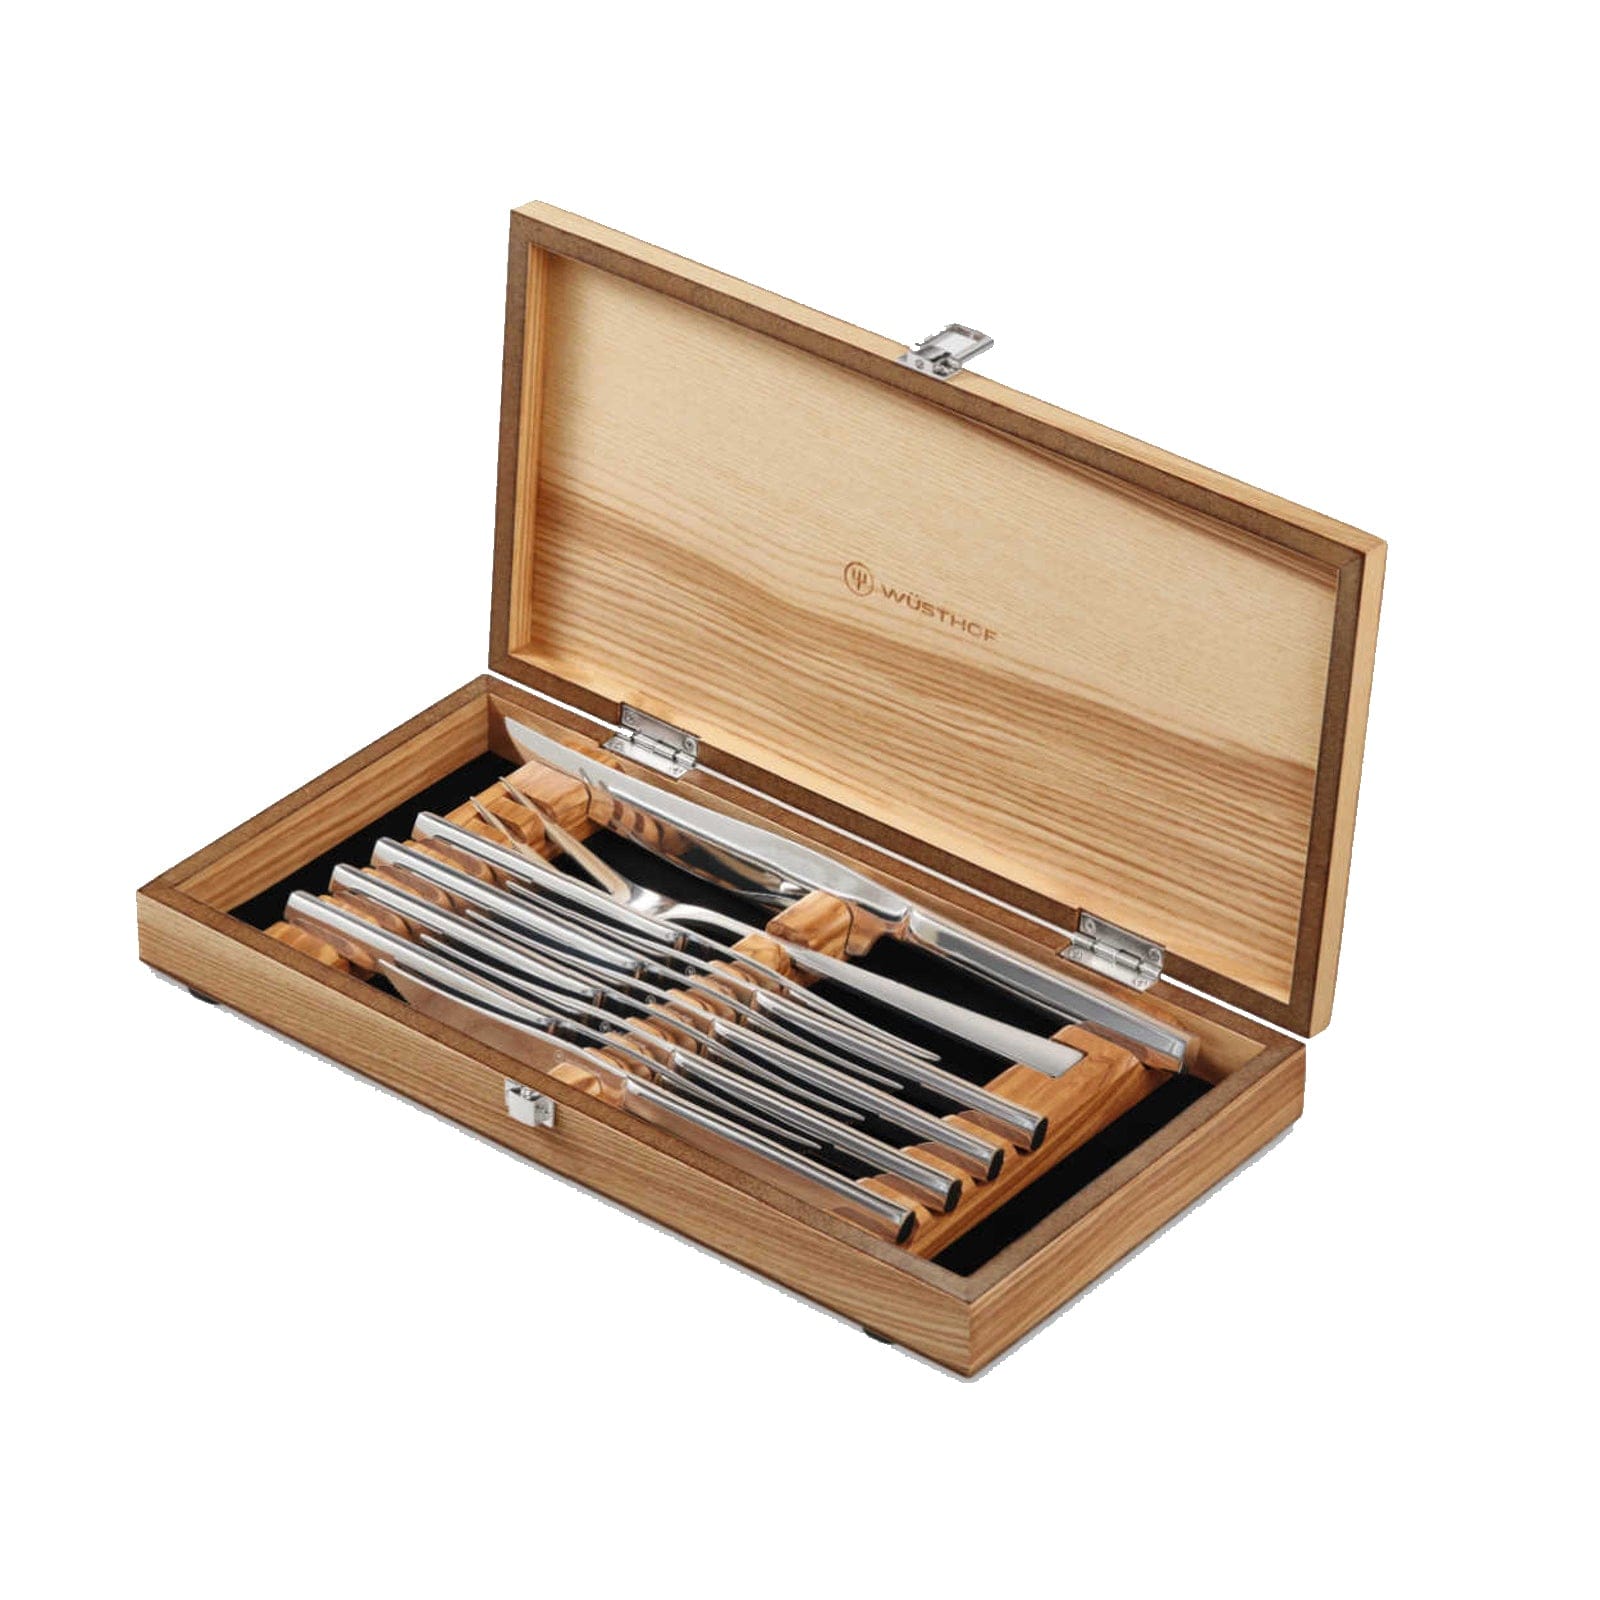 Wusthof Knife Sets Wusthof Mignon 10-Piece Stainless Steel Steak and Carving Set